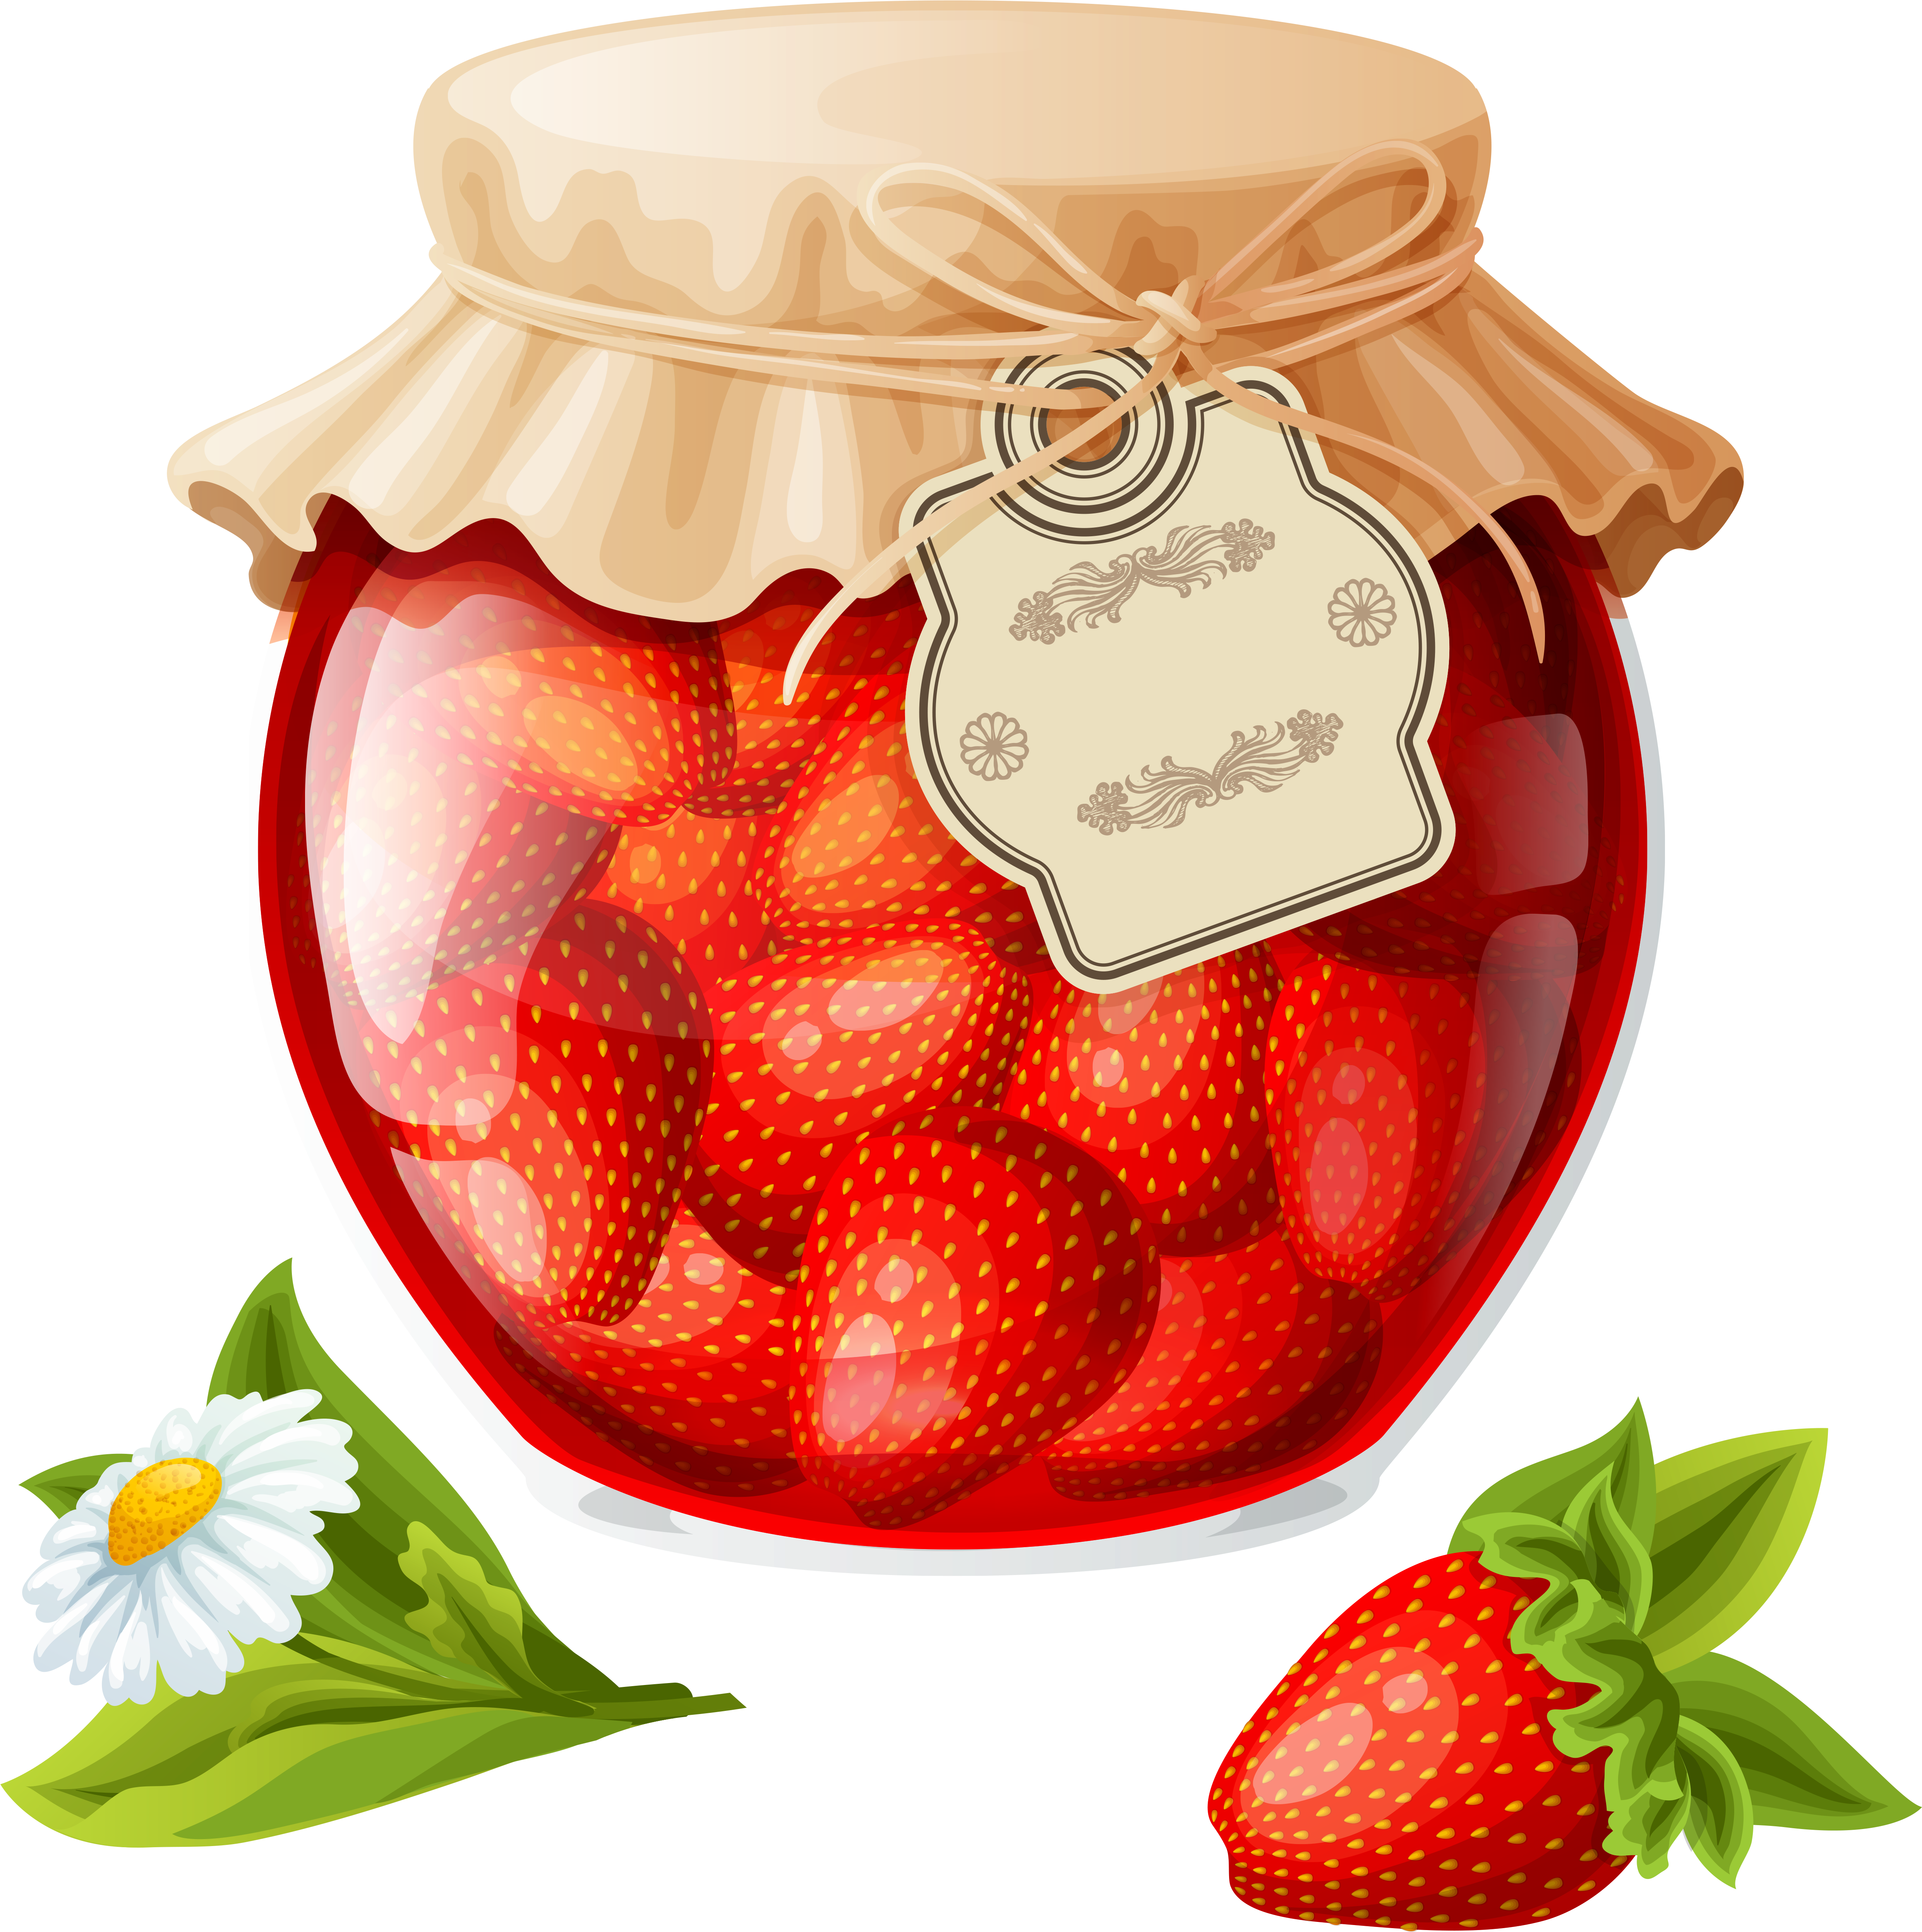 A Jar Of Strawberries And A Flower